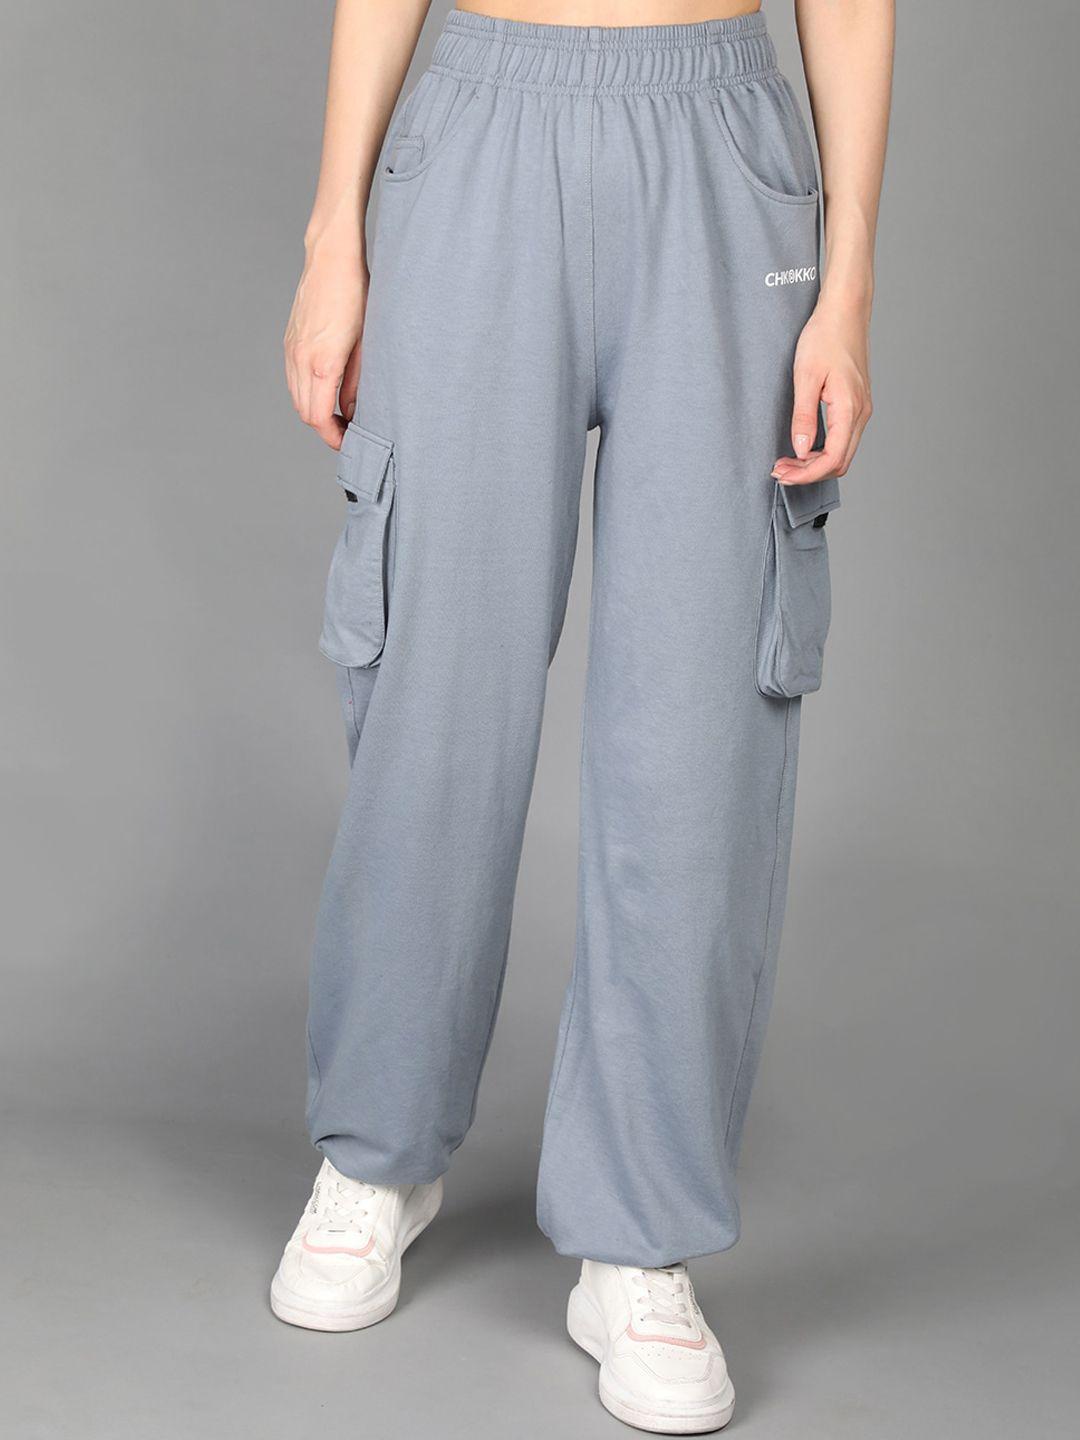 chkokko-women-grey-solid-cotton-relaxed-fit-joggers